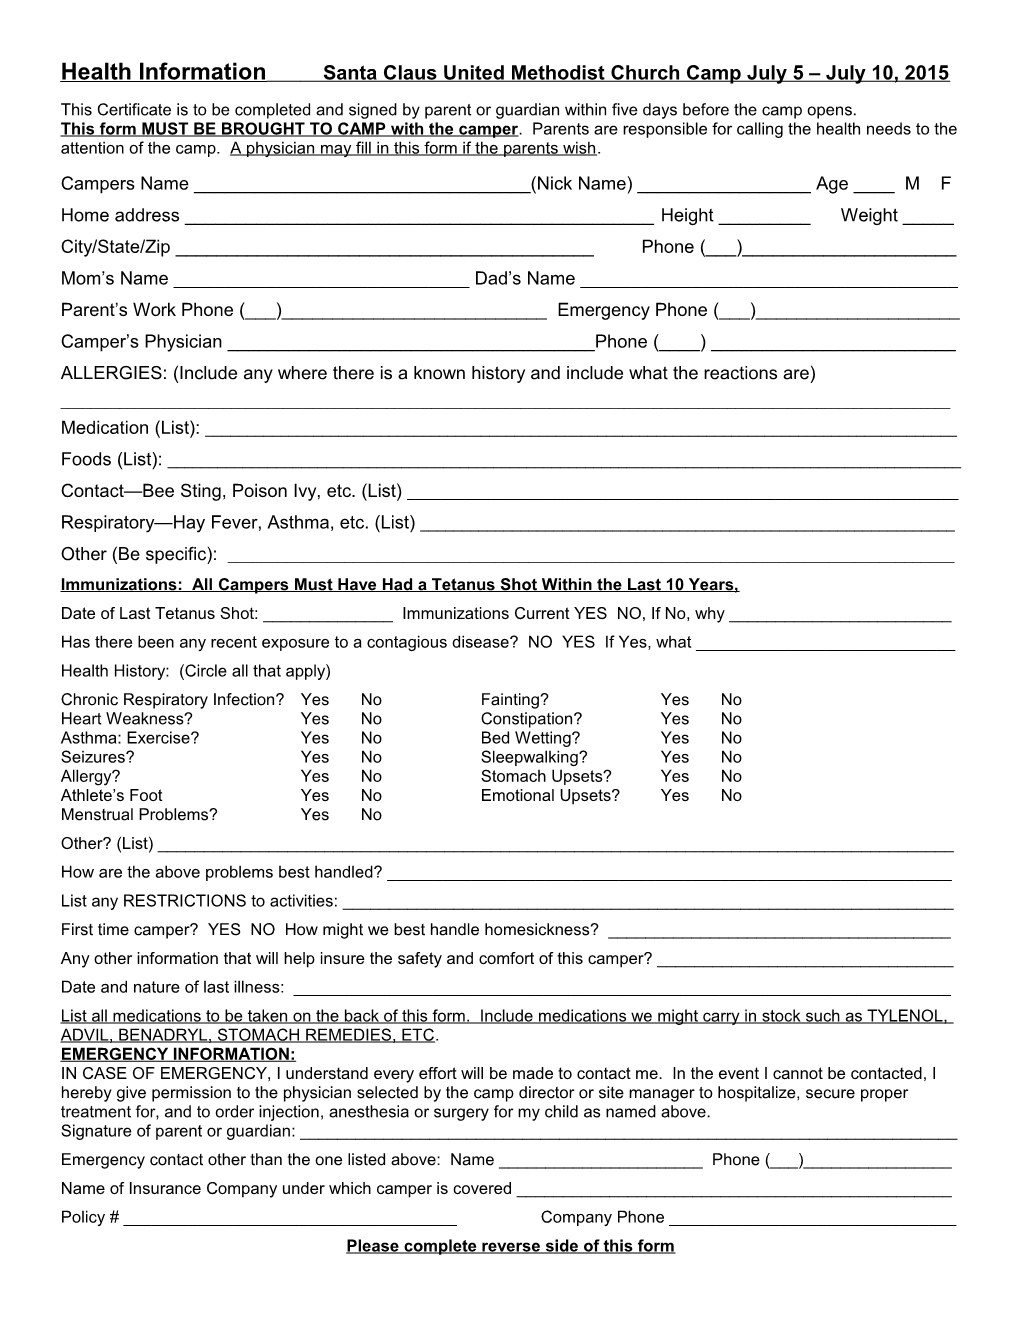 Please Complete This Form